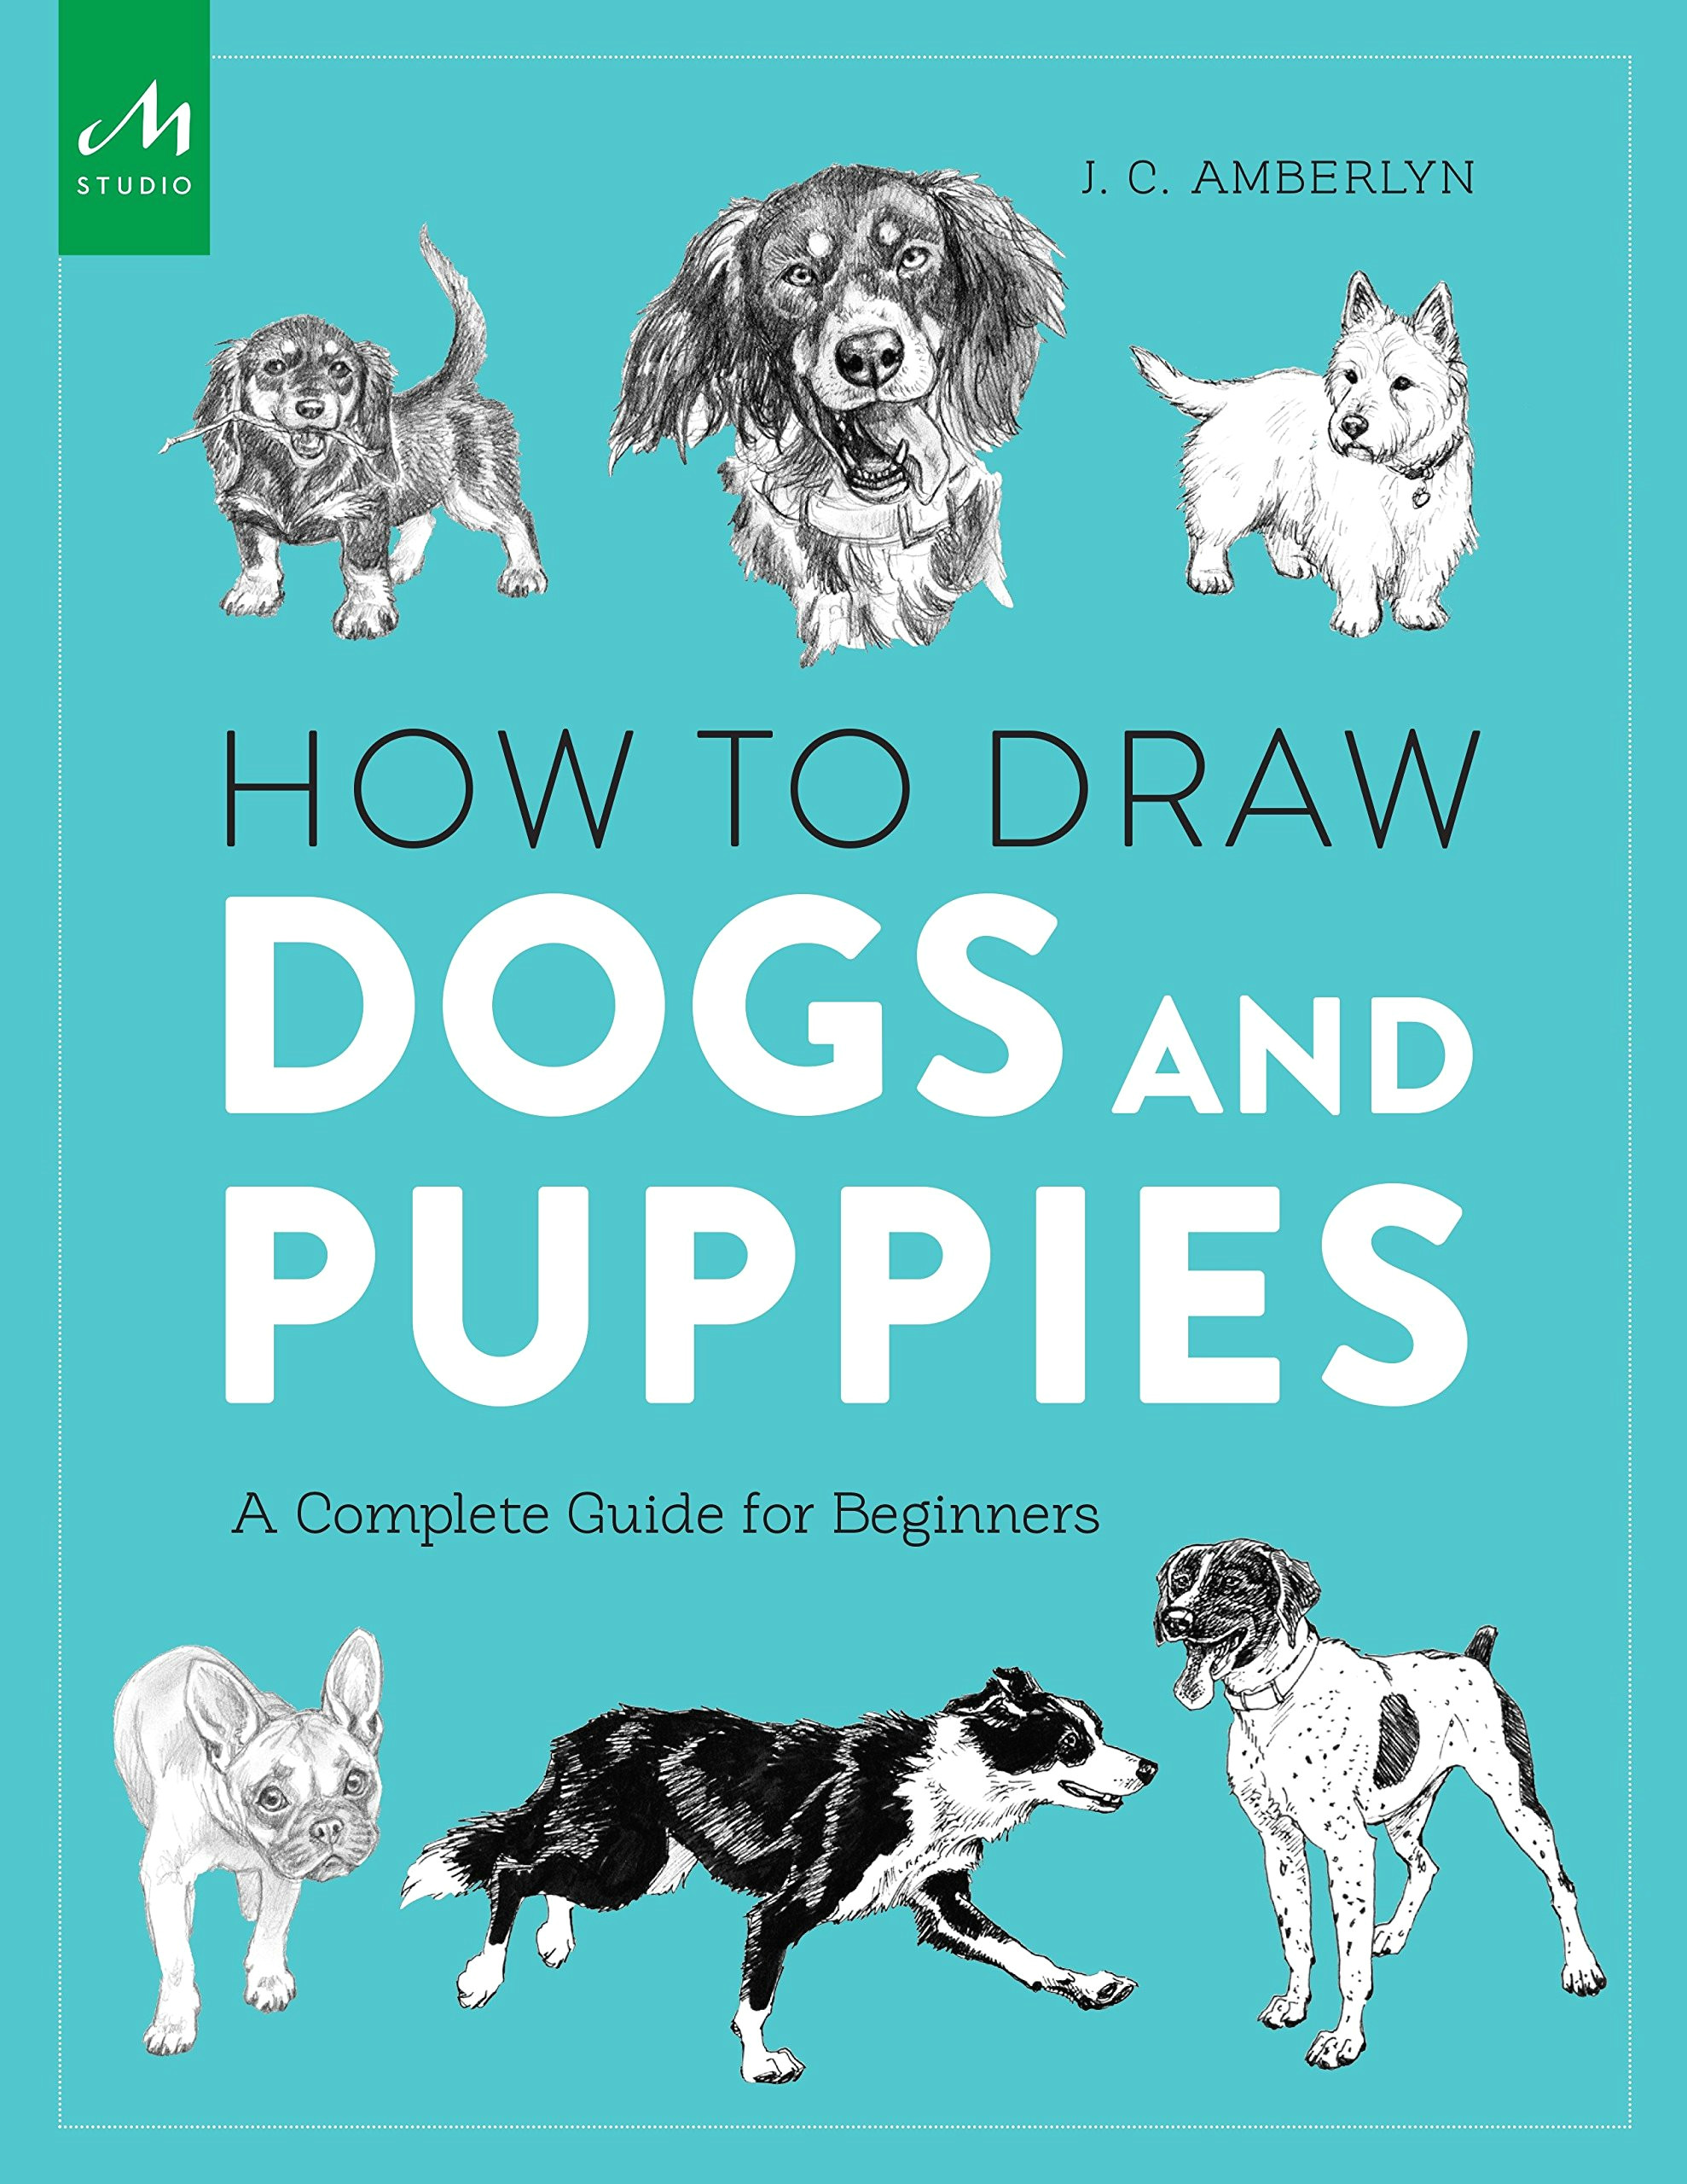 Beginner Easy Dog Drawing How to Draw Dogs and Puppies A Complete Guide for Beginners